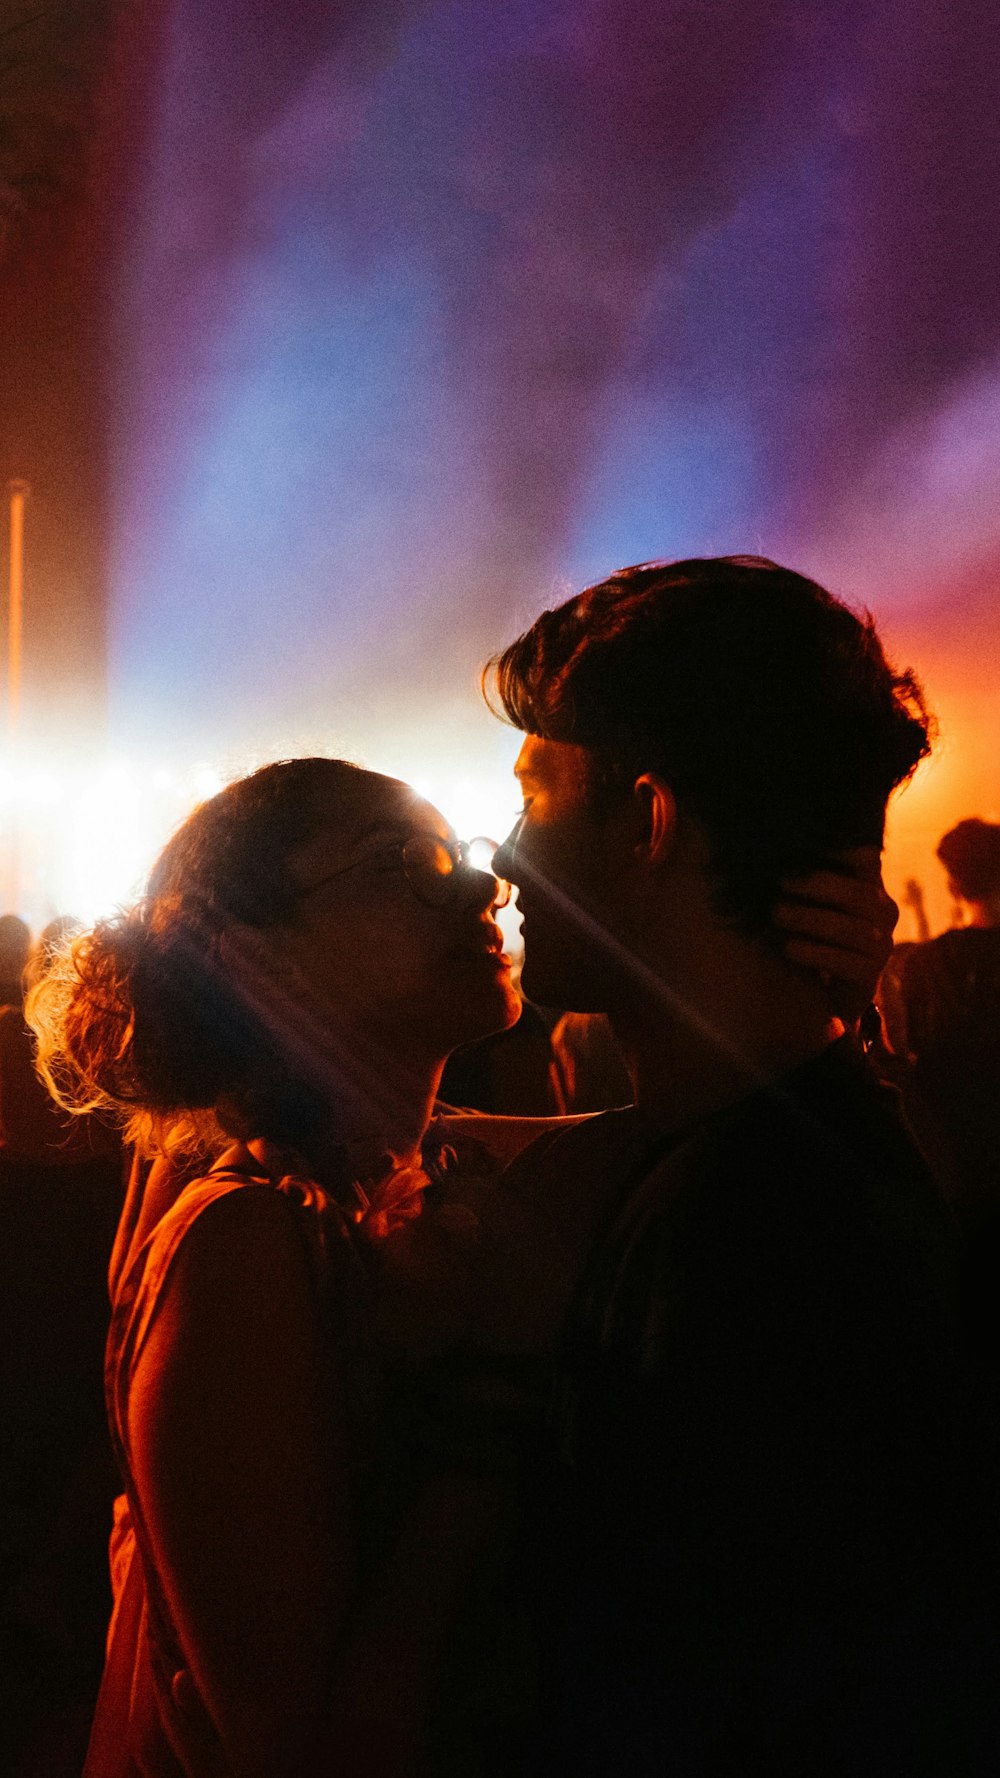 man and woman kissing during night time